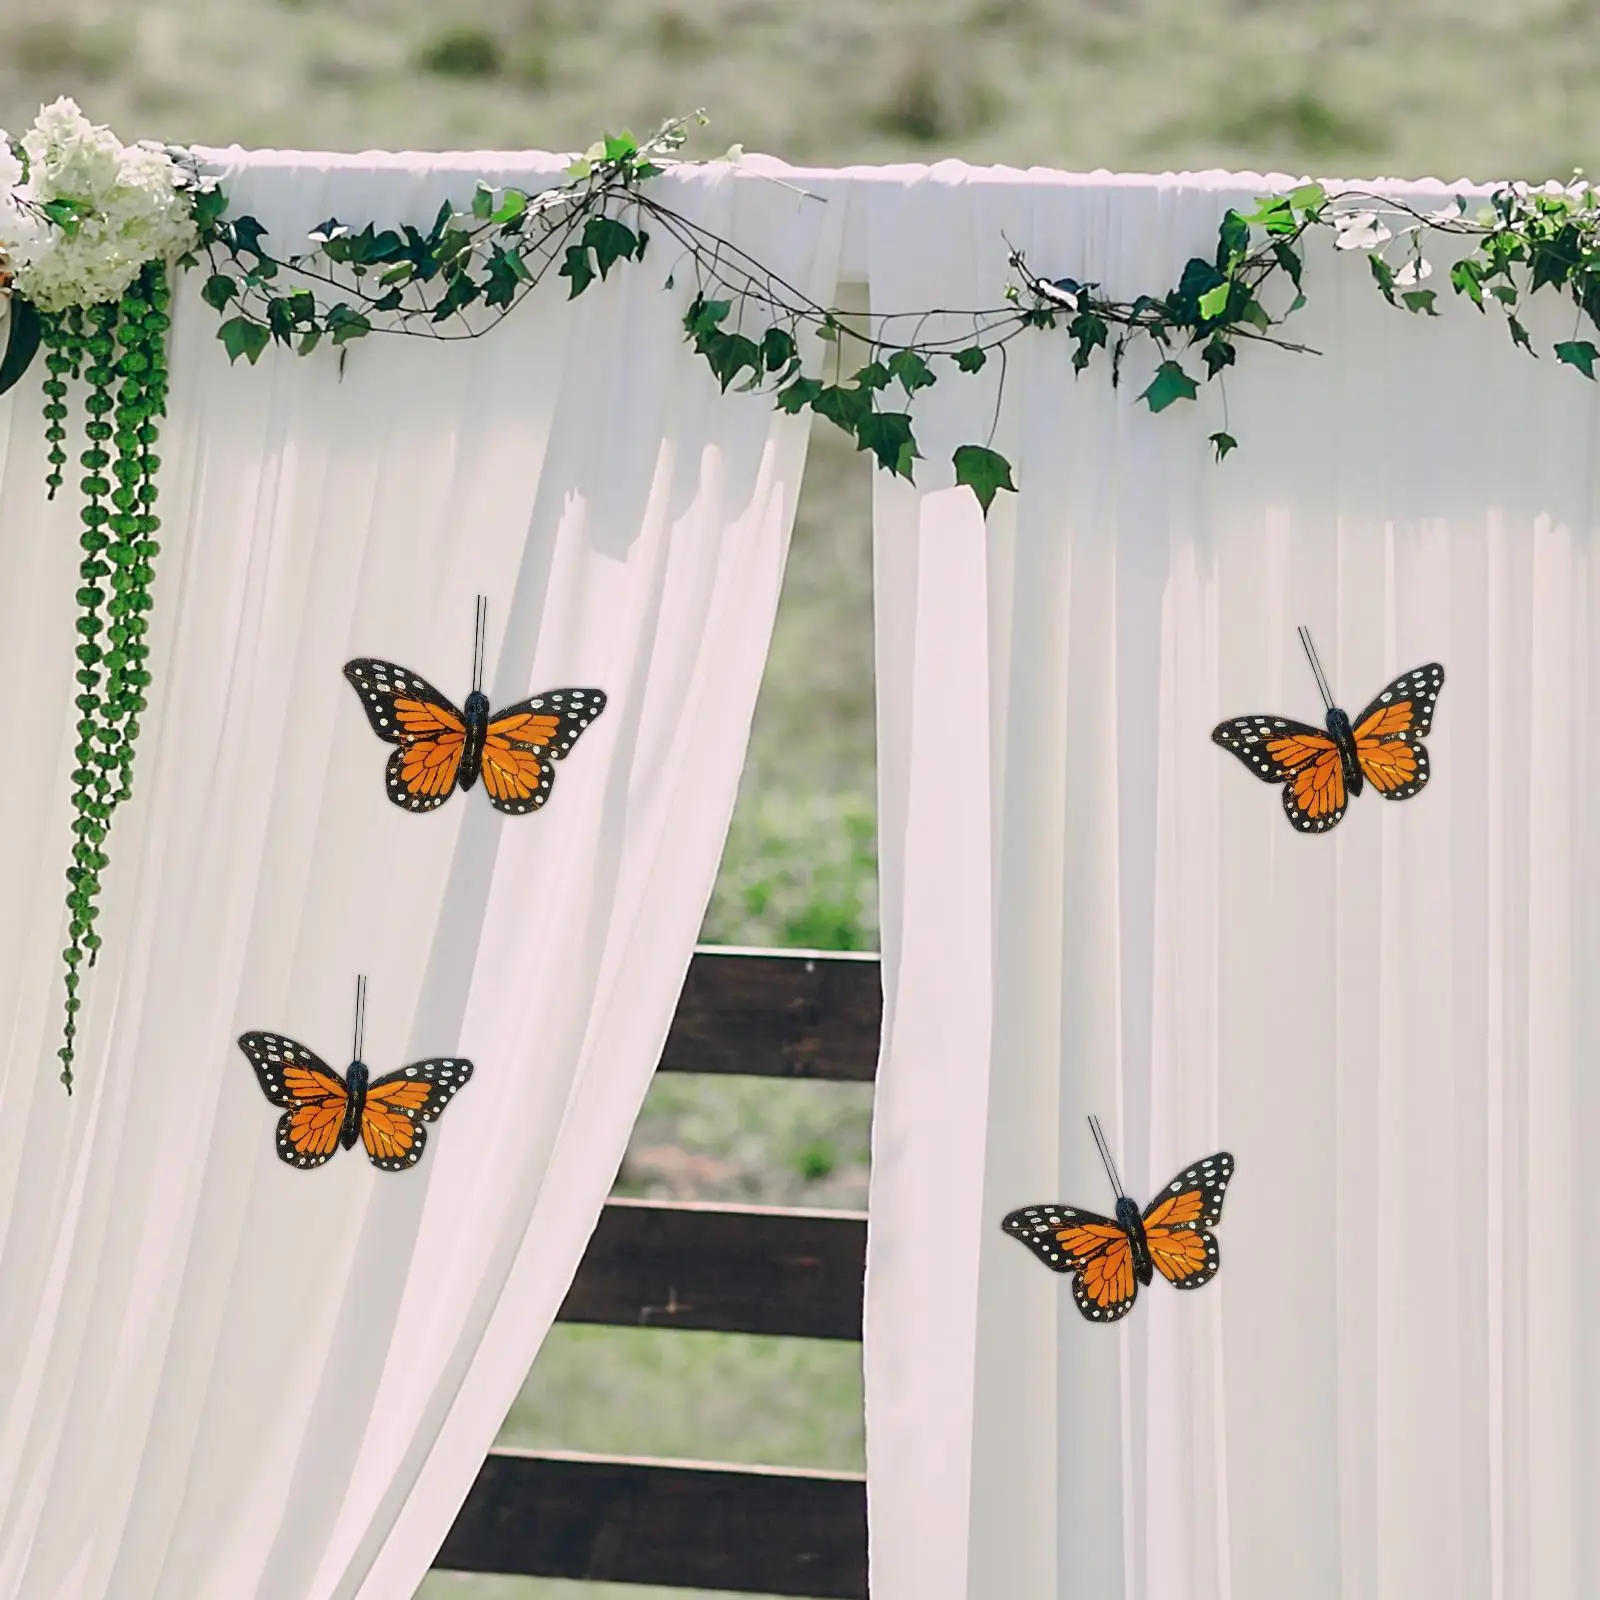 10x Monarch Butterfly Wall Decor Crafts 3D Butterflies for Party Home Wall